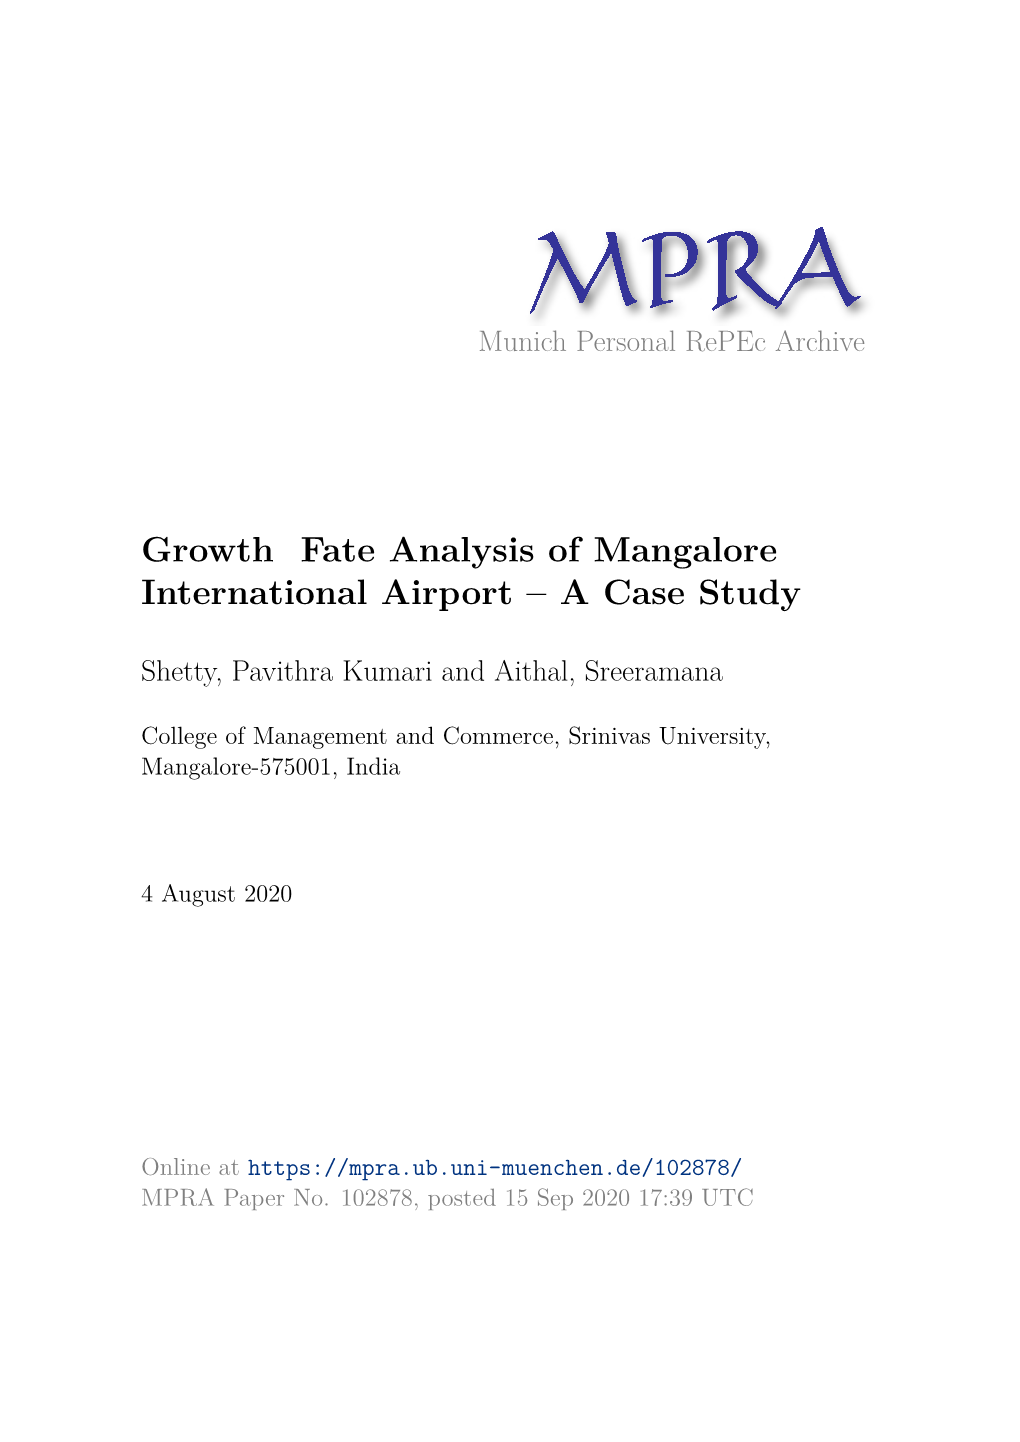 Growth Fate Analysis of Mangalore International Airport – a Case Study